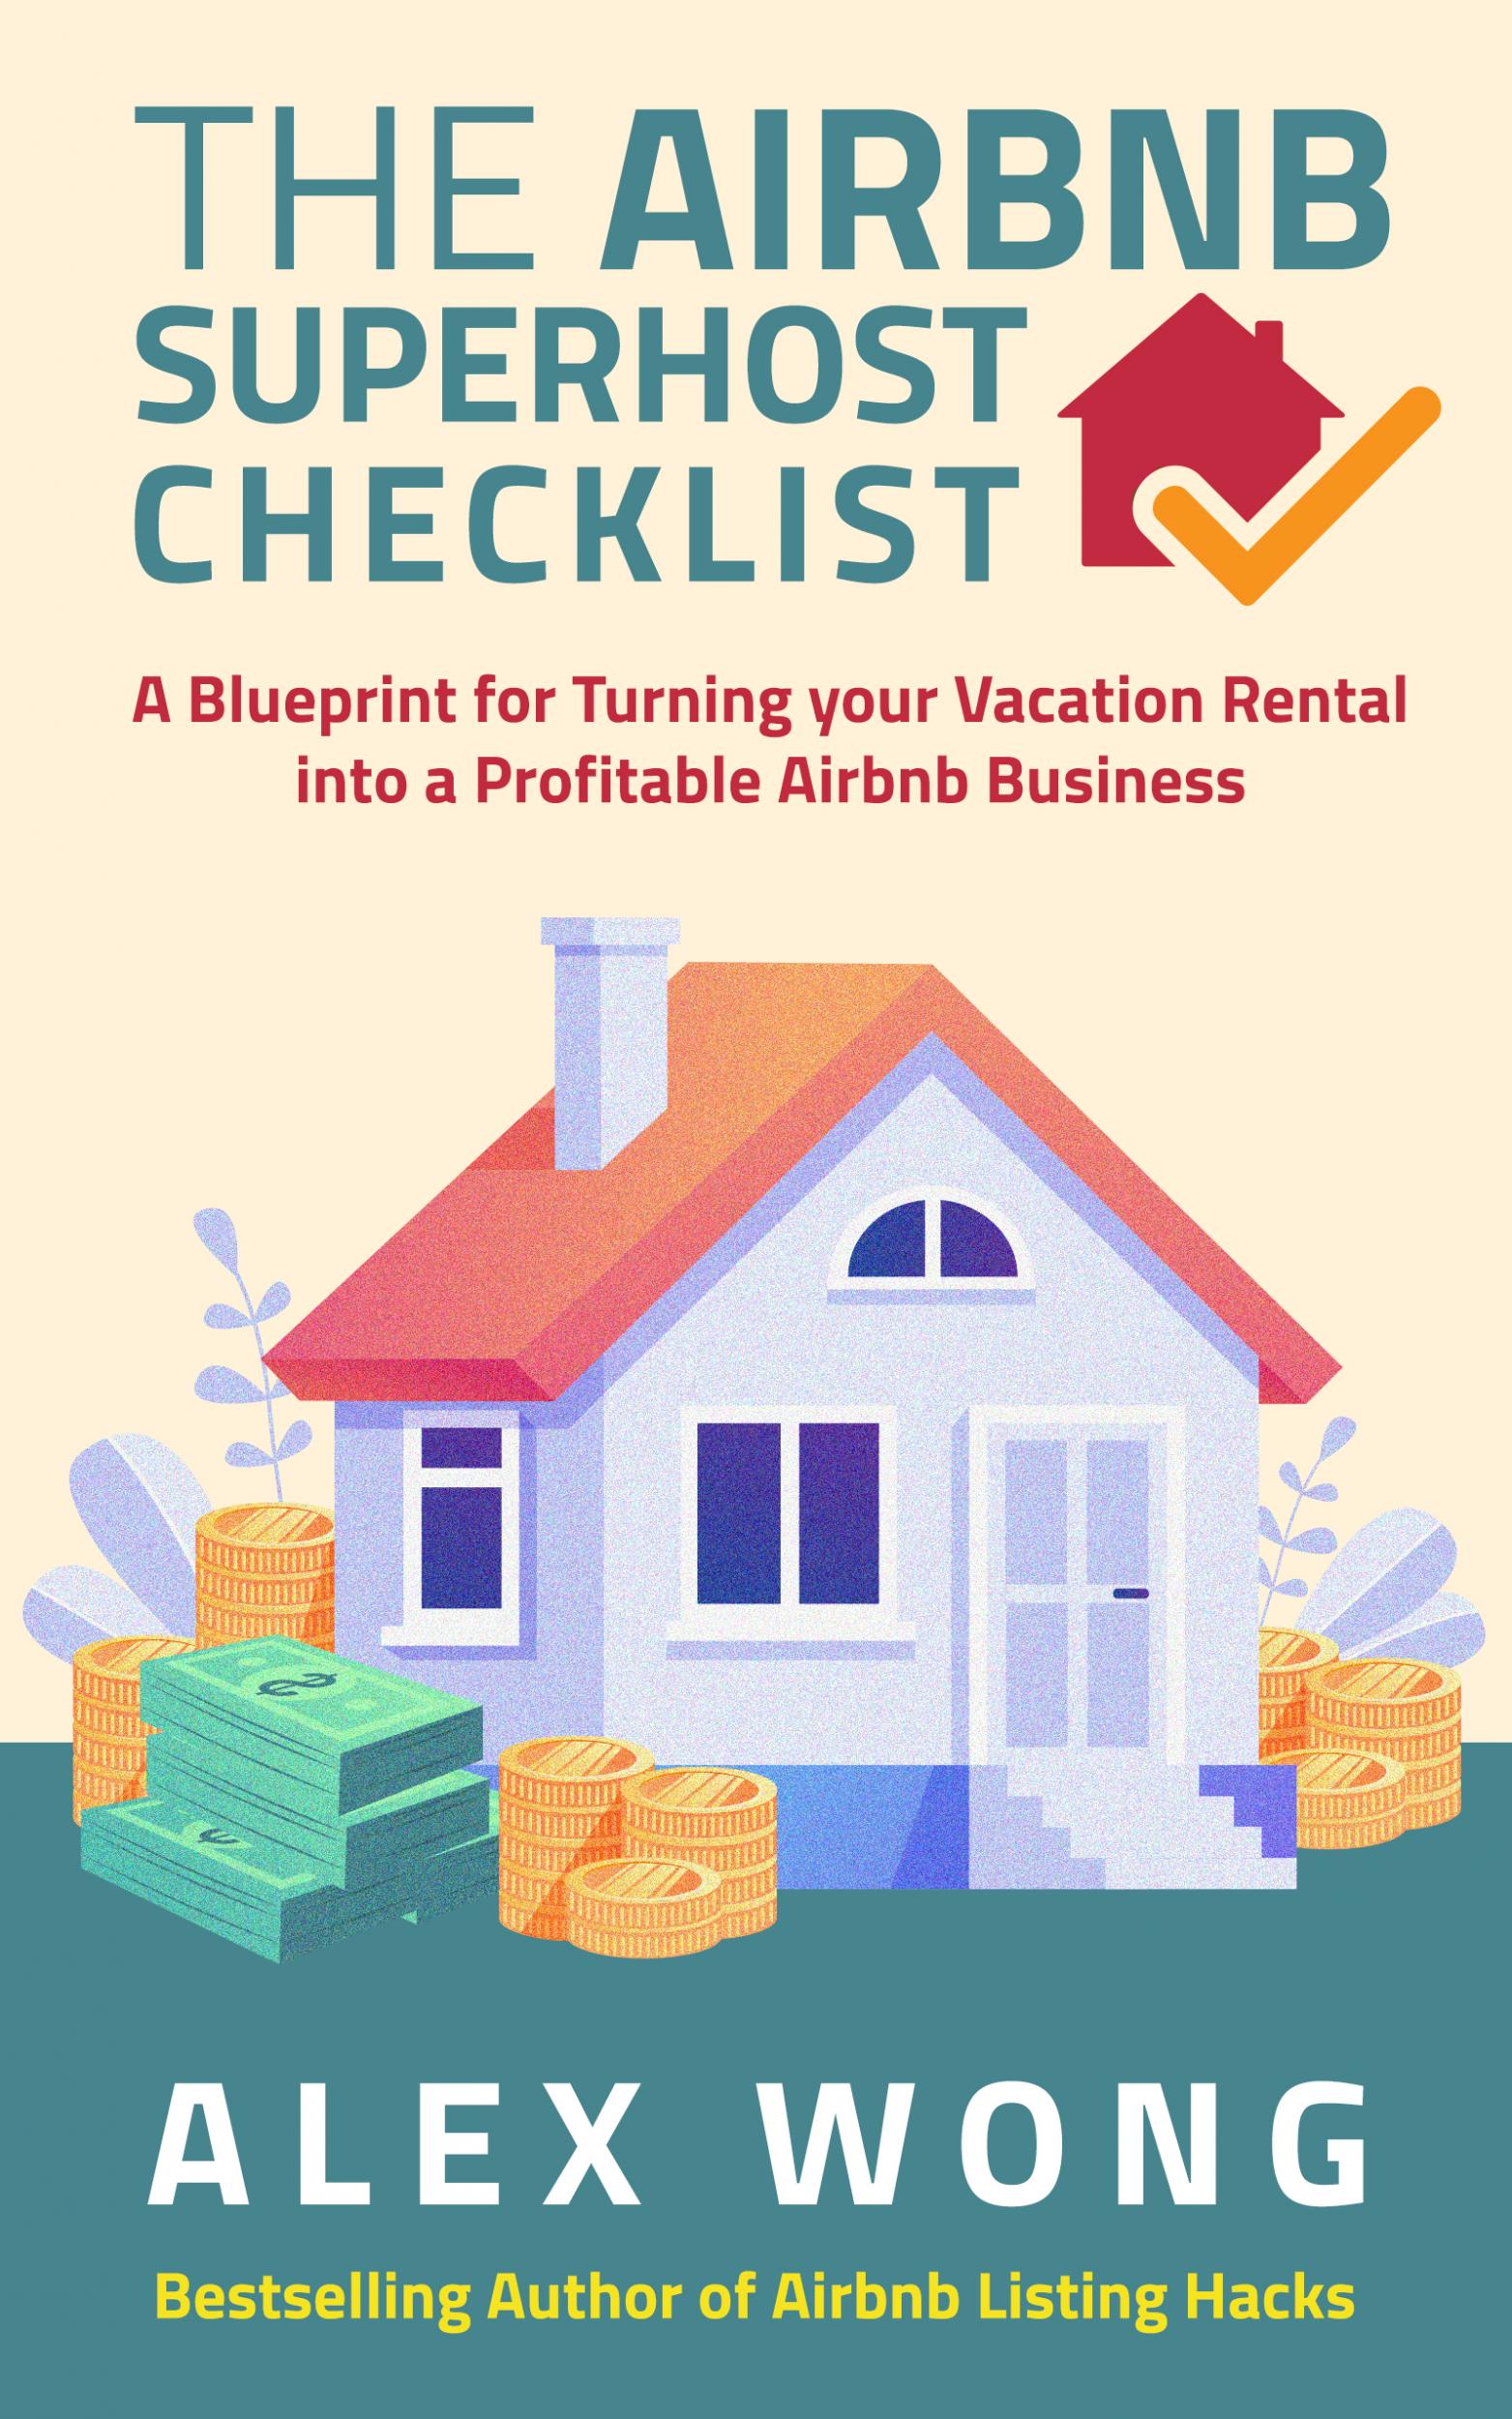 Get your free copy of The Airbnb’s Super Host’s Checklist